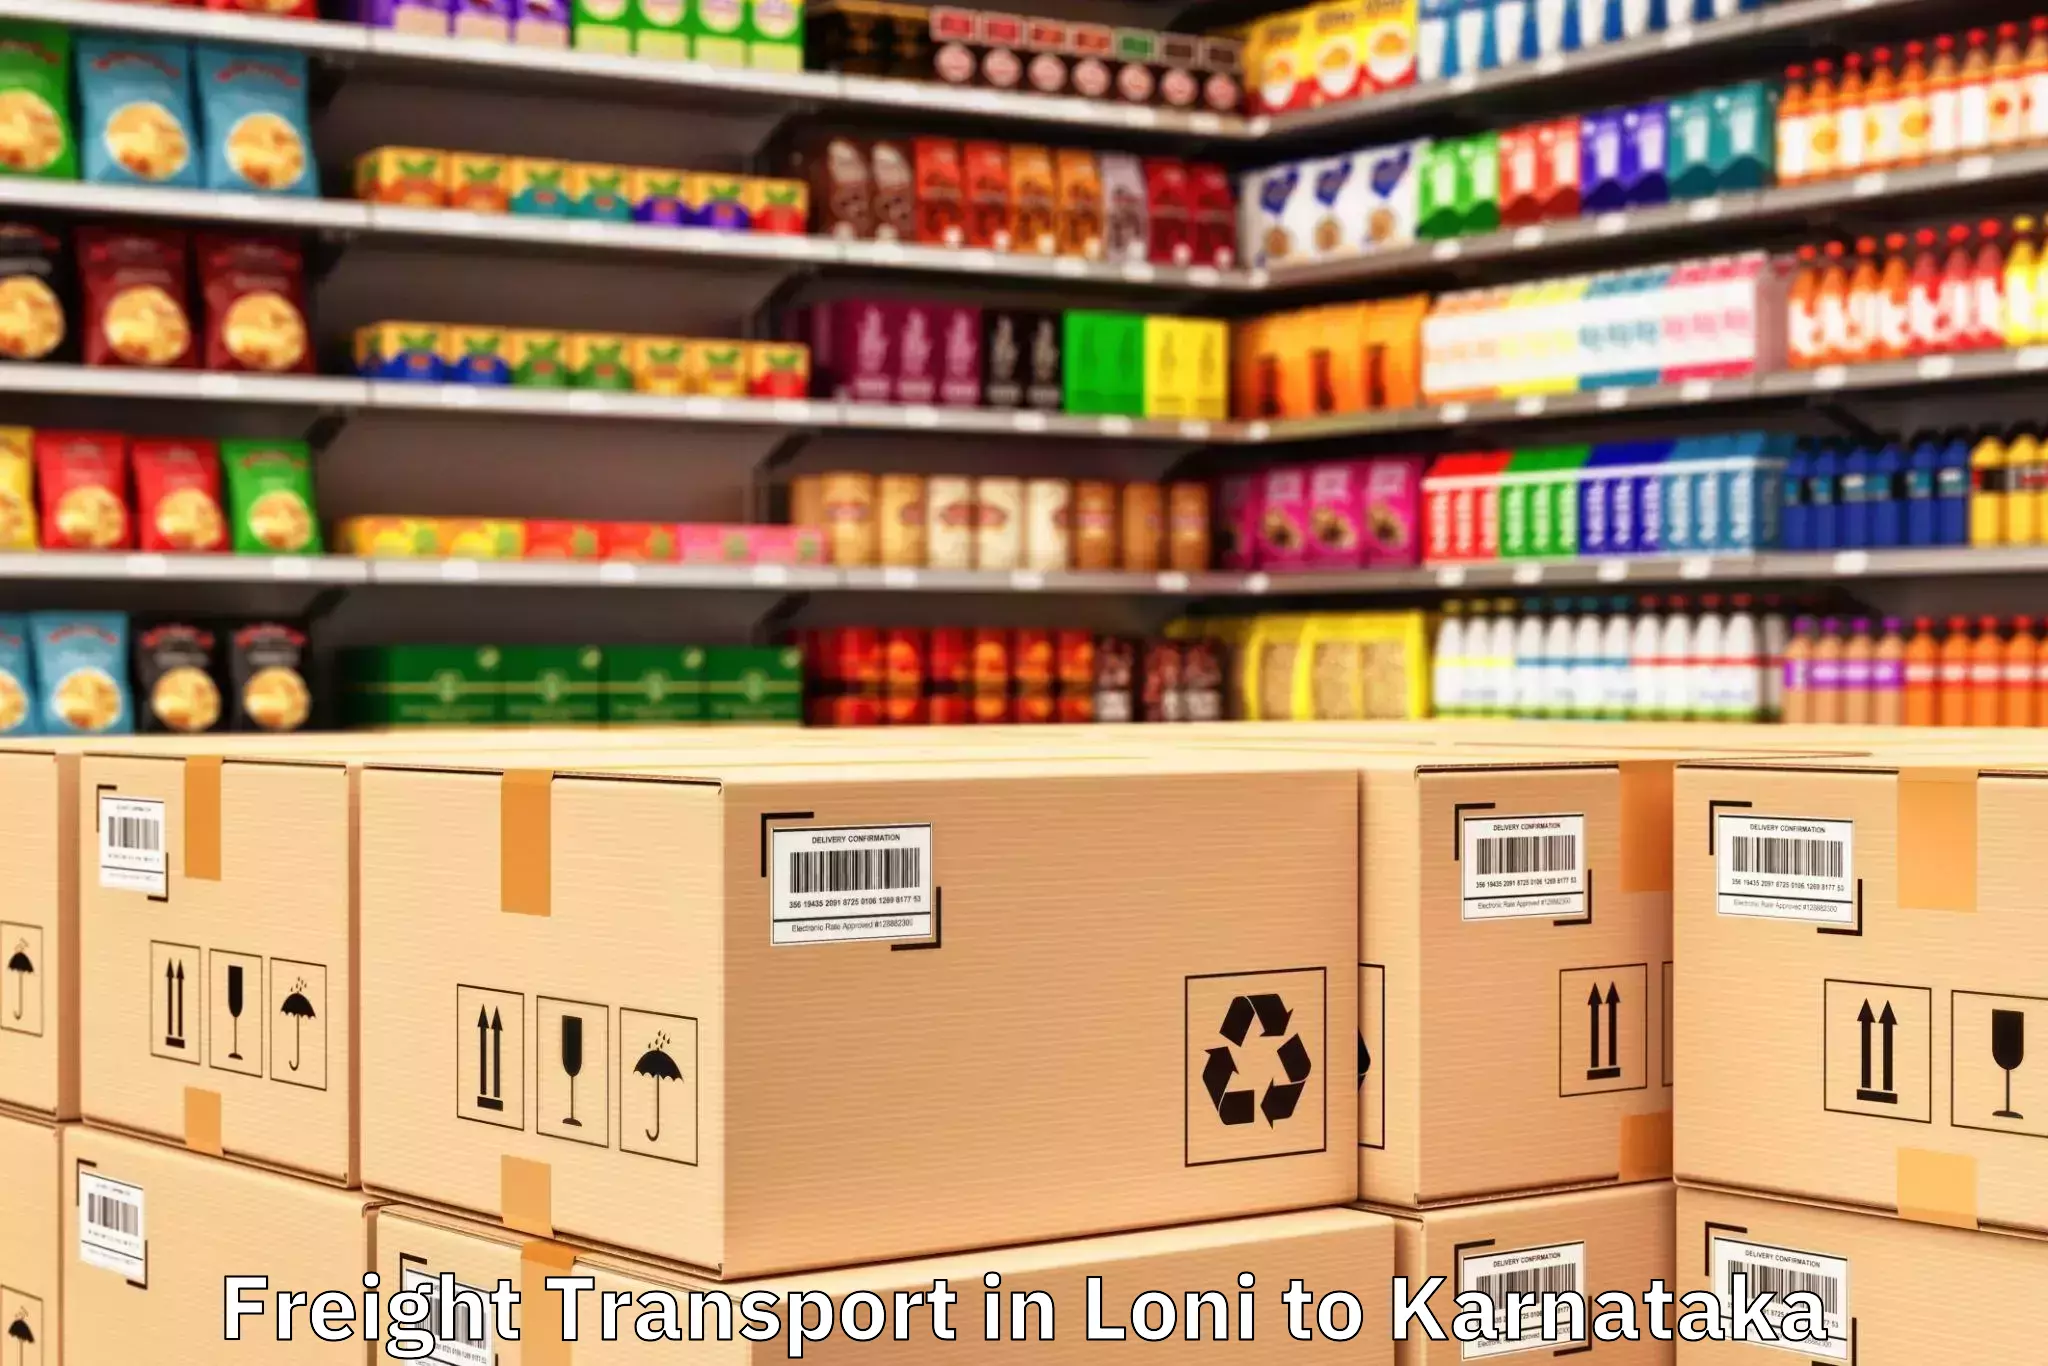 Top Loni to Bangalore East Freight Transport Available